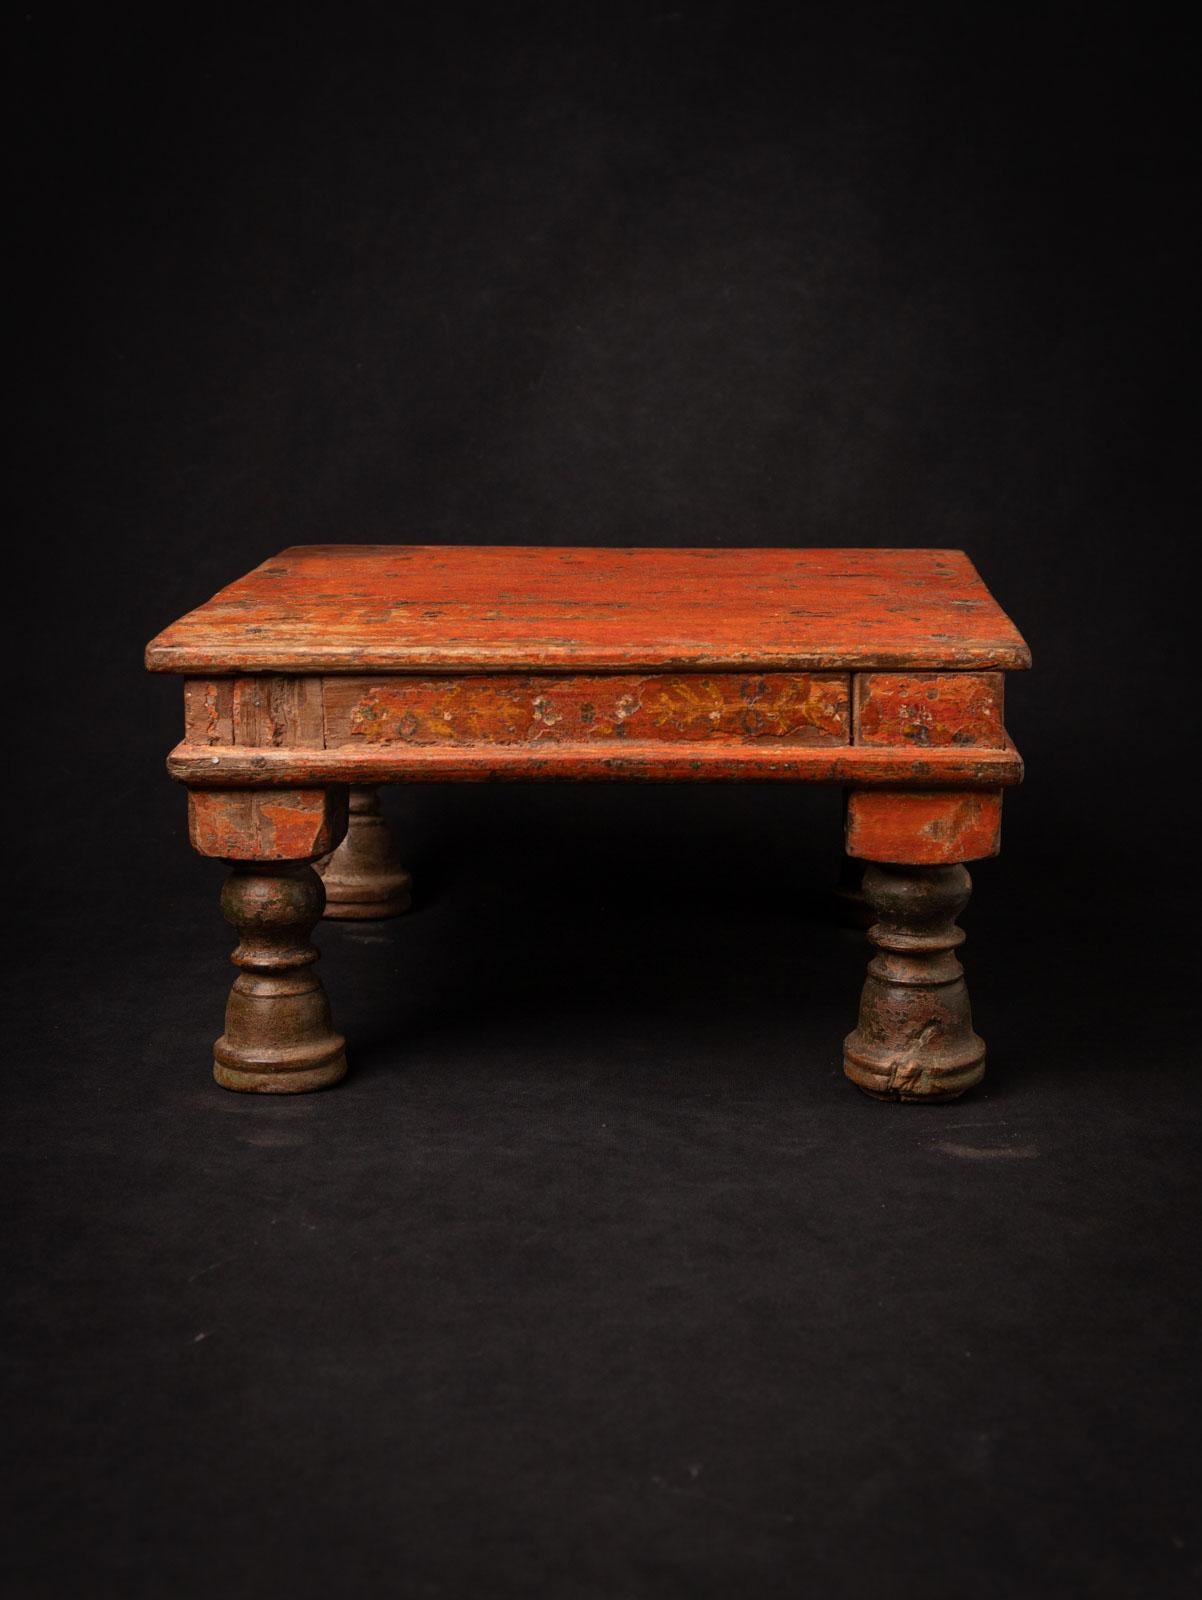 19th Century 19th century Antique Indian wooden shrine / table from India